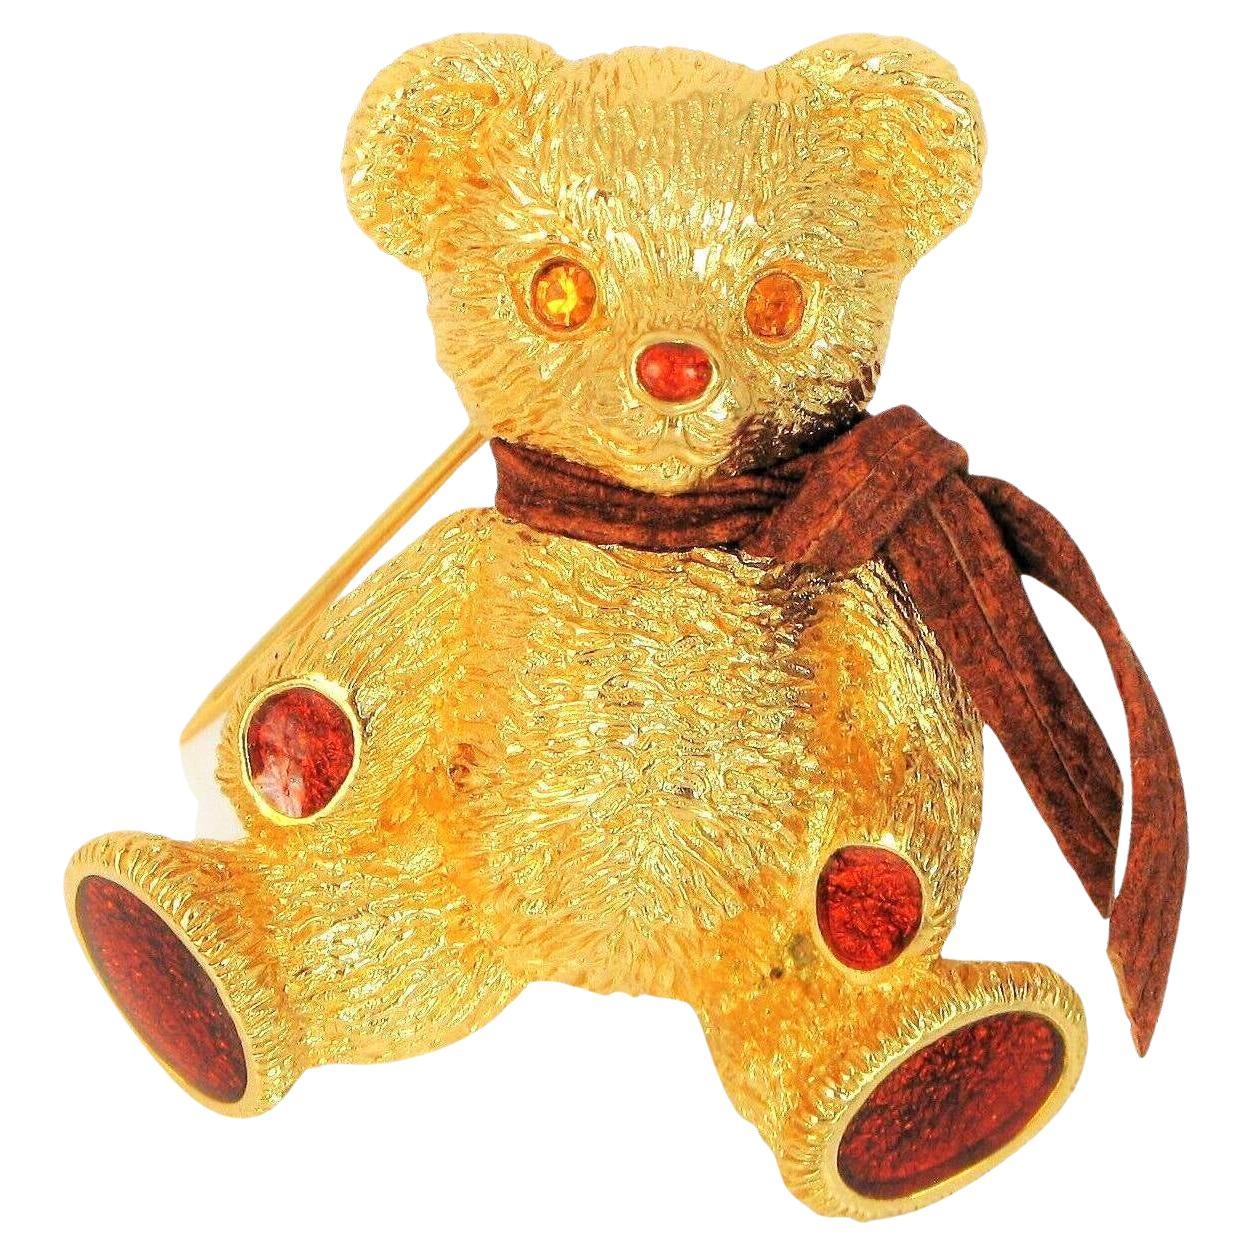 Burberry Thomas Trench-coat Teddy Bear Key-ring in Natural